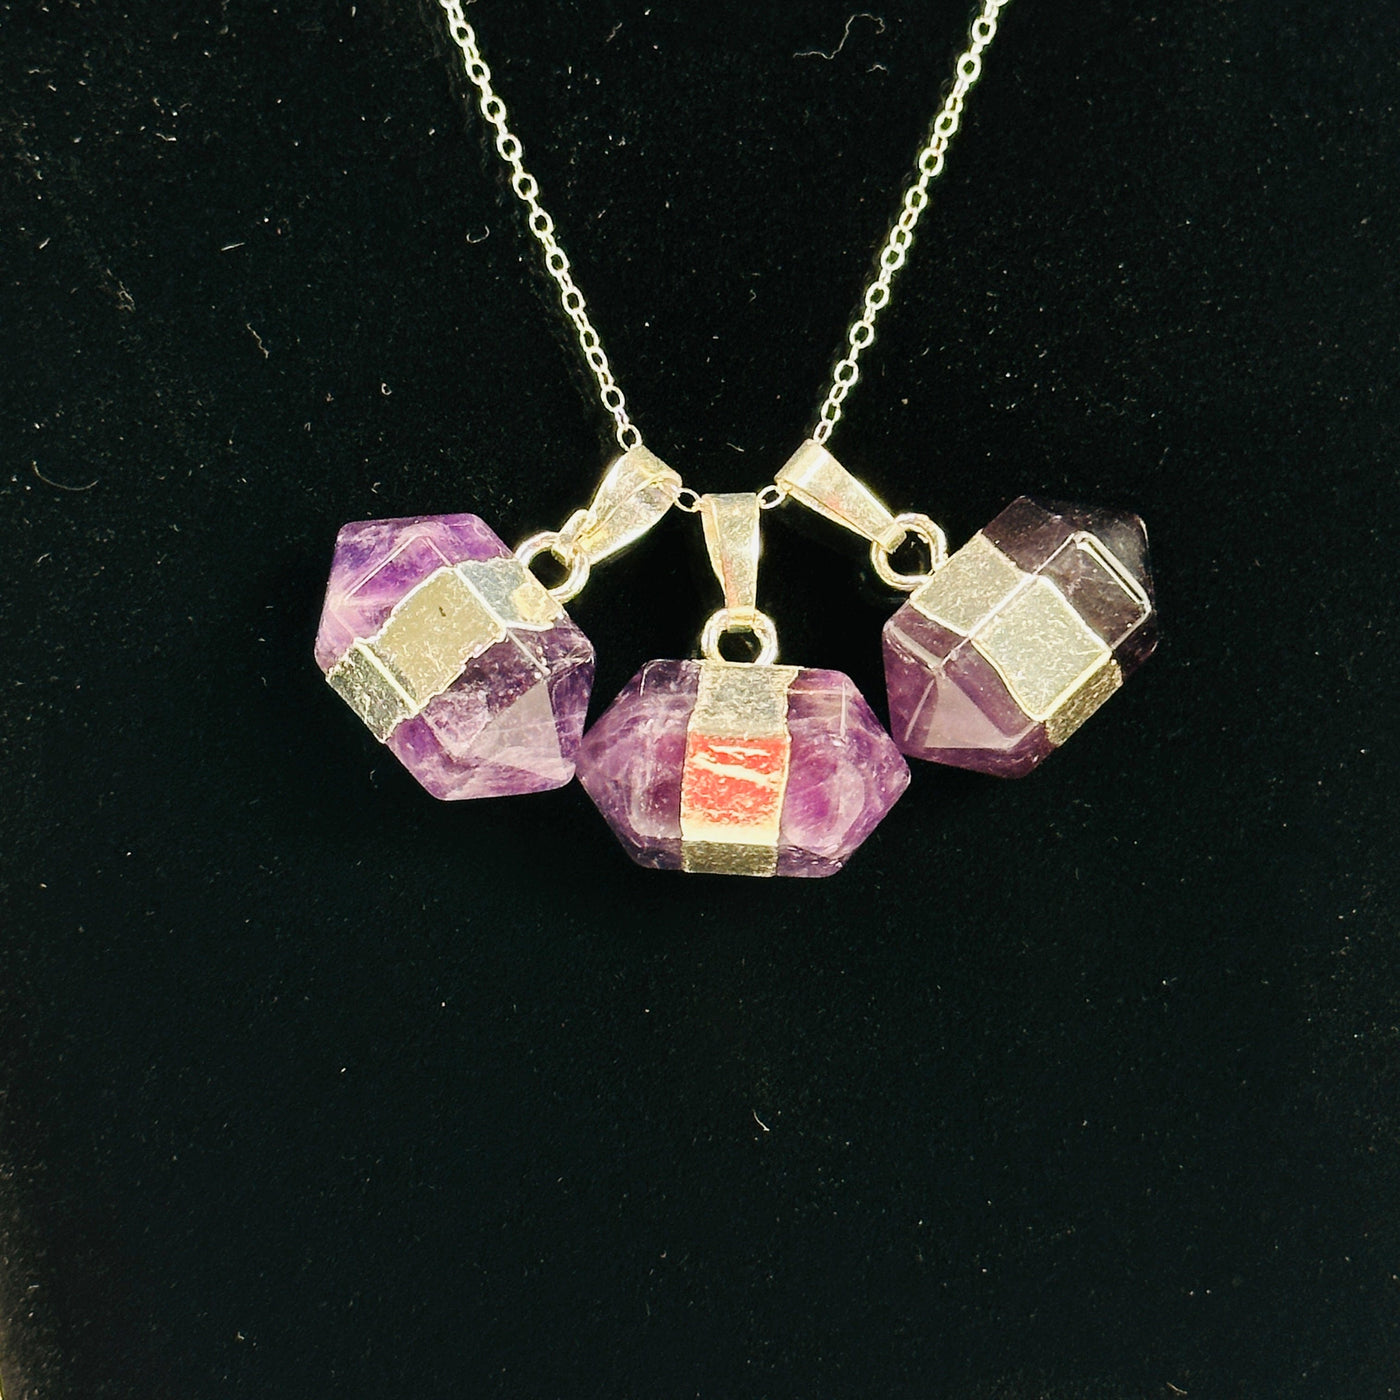 amethyst pendants on necklace chain